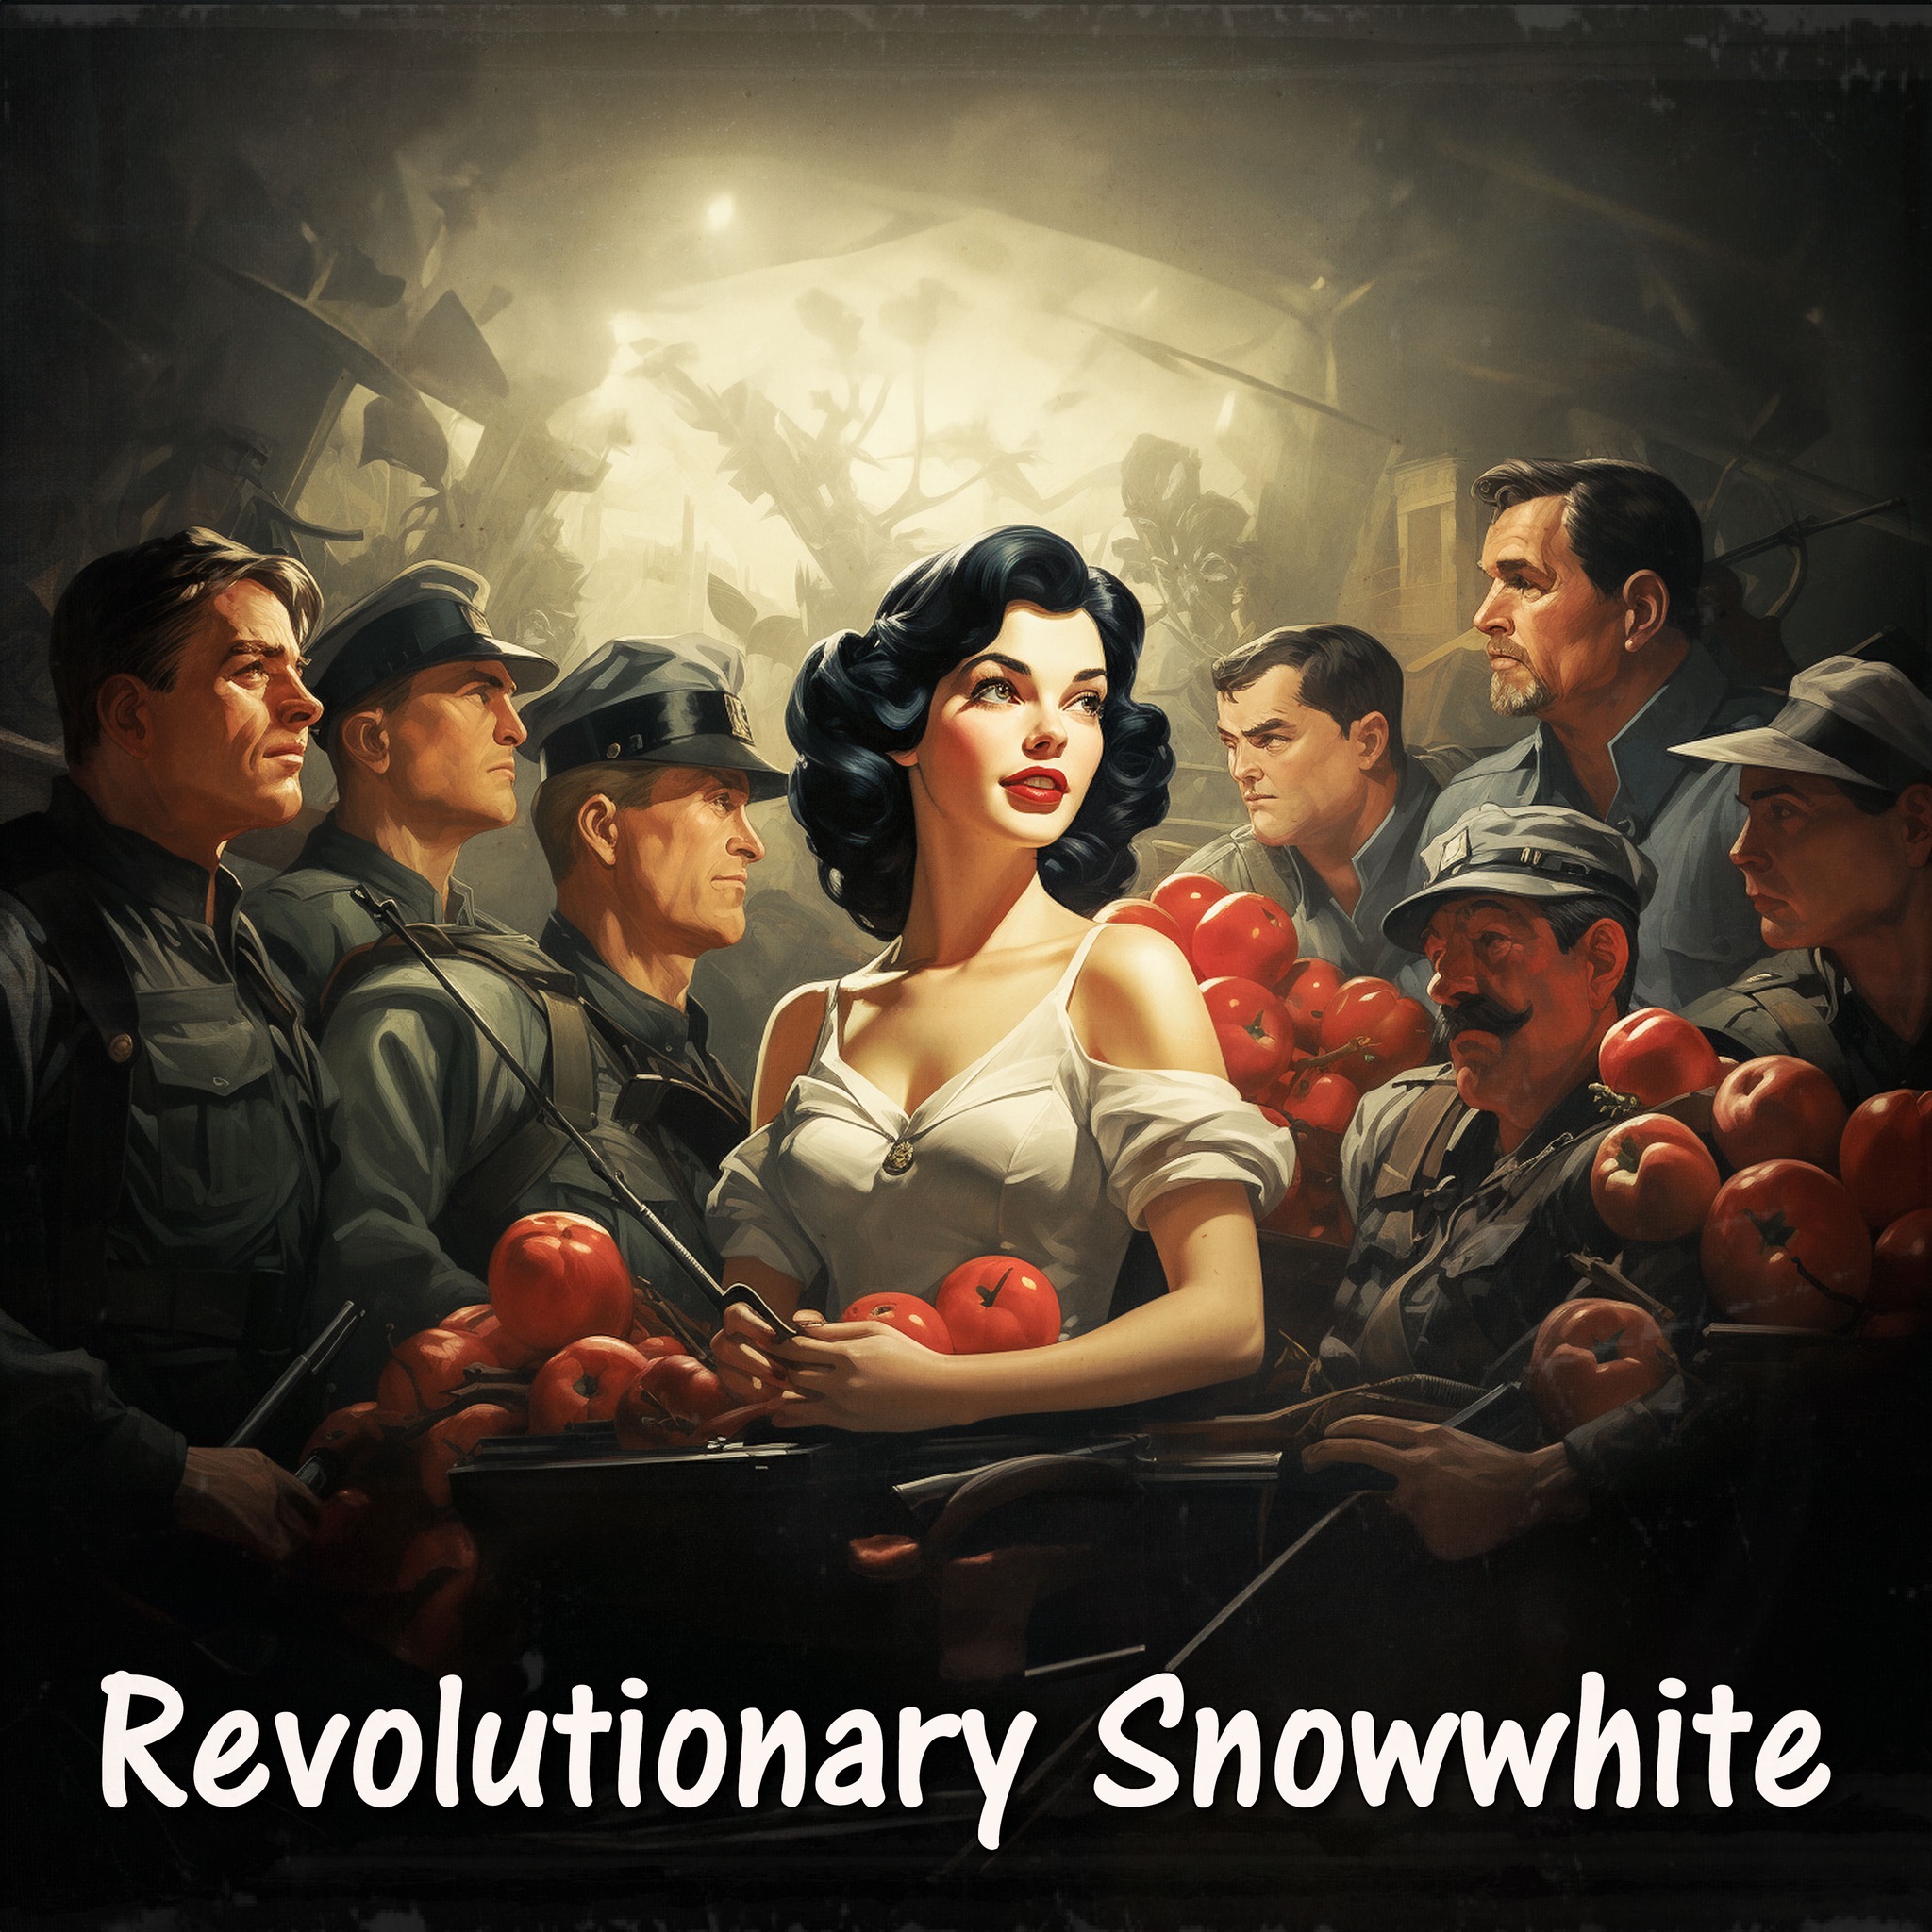 Snow White and the Seven Dwarfs’ will soon change its appearance and characters